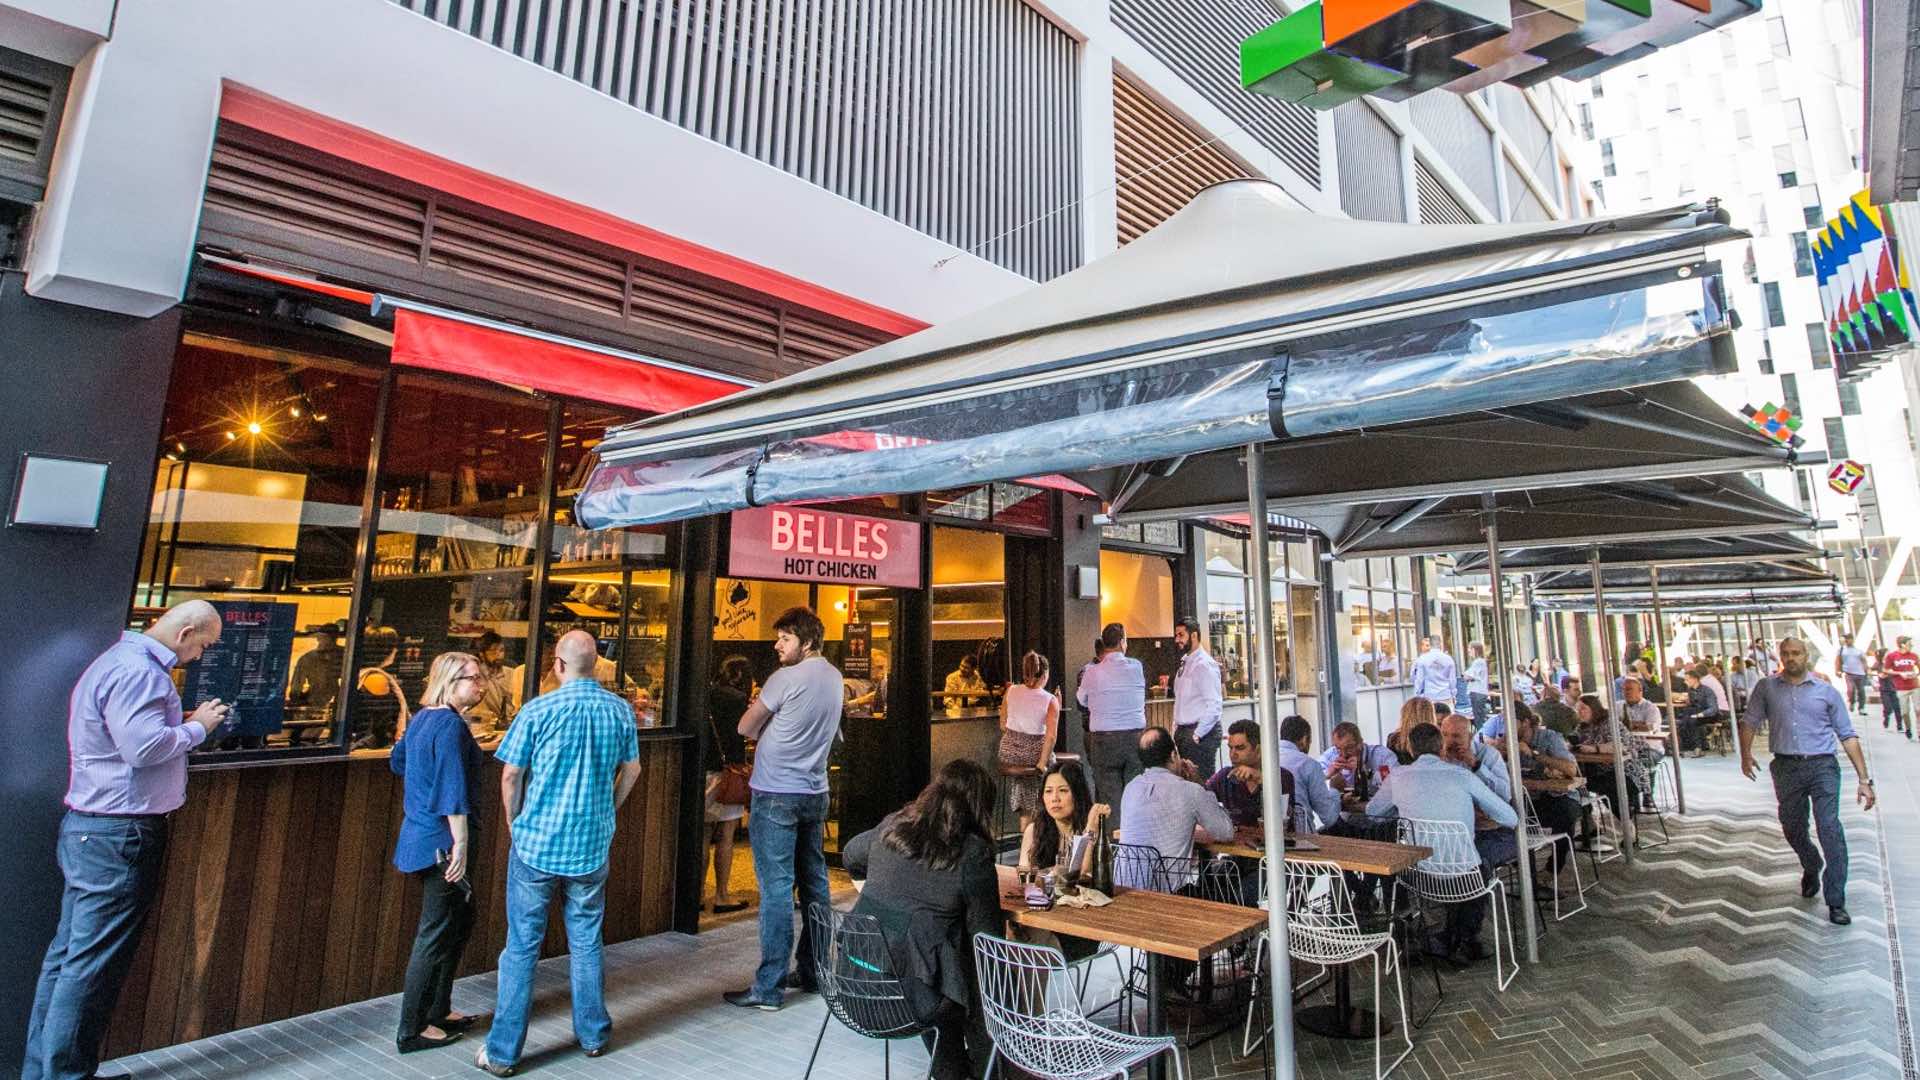 Sydney's New Darling Square Food Precinct Steam Mill Lane Is Now Open